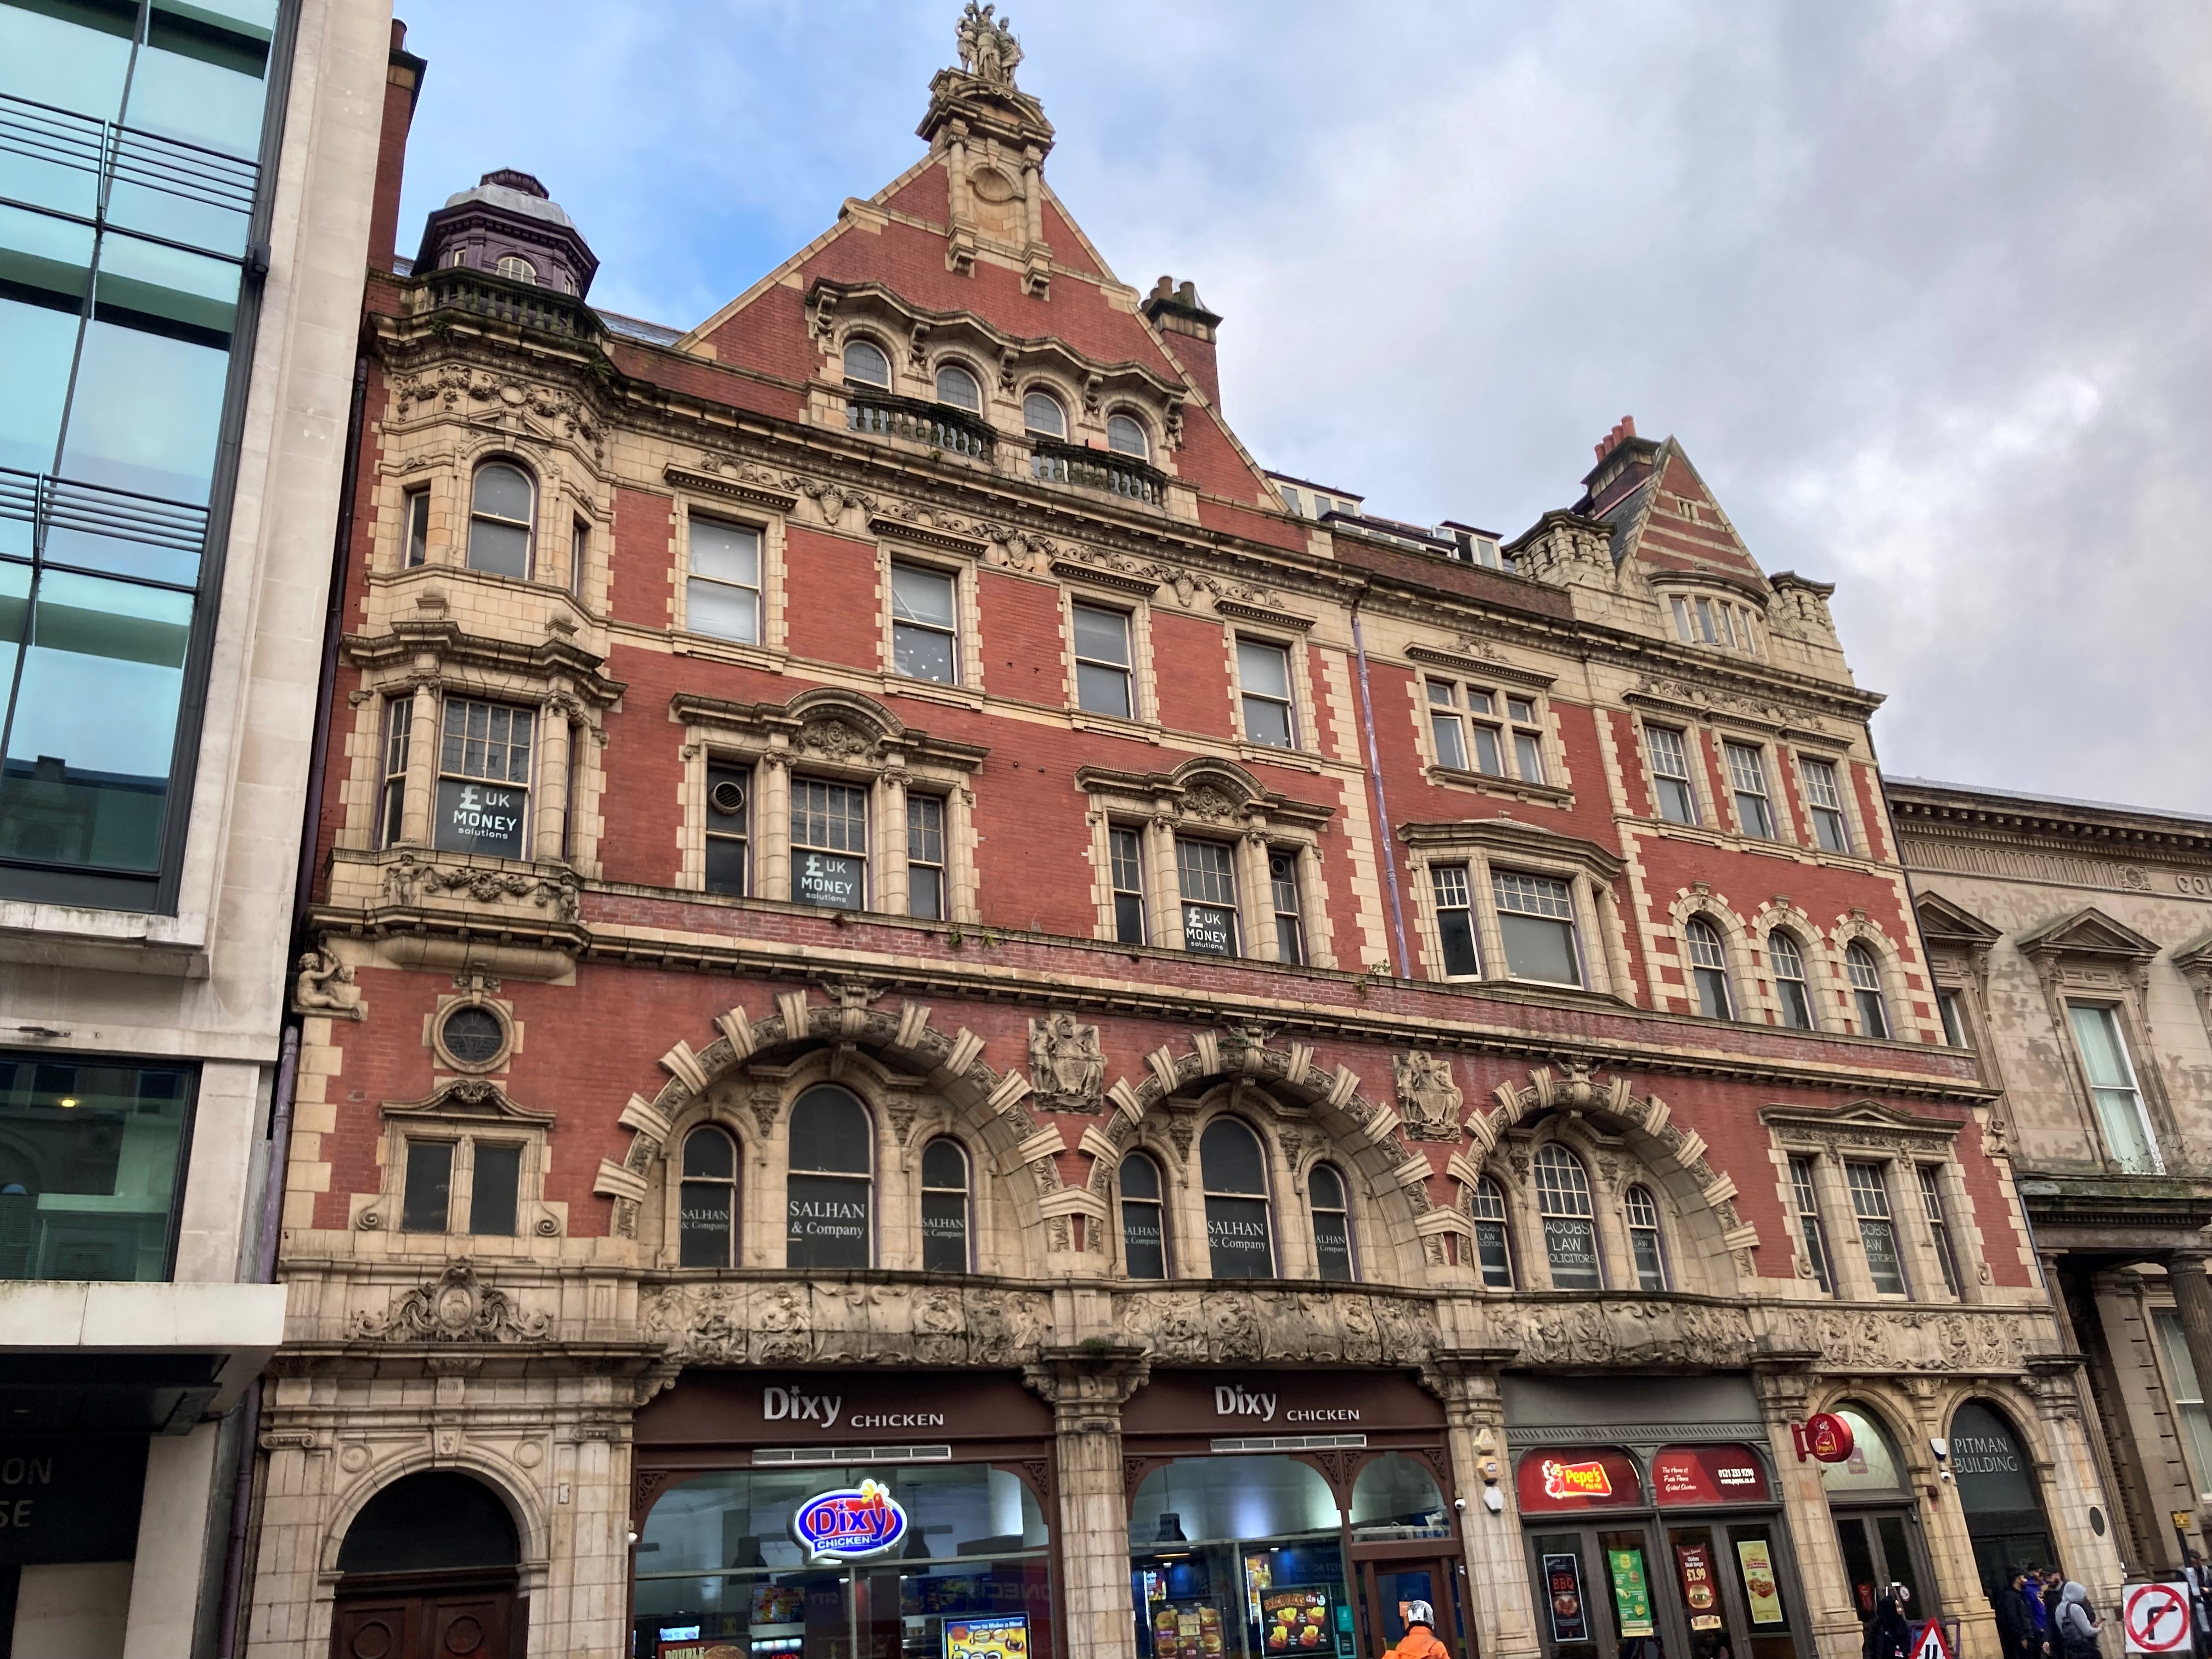 The Murdoch Chambers & Pitman Building in Corporation Street is believed to have been home to Britain's first vegetarian restaurant